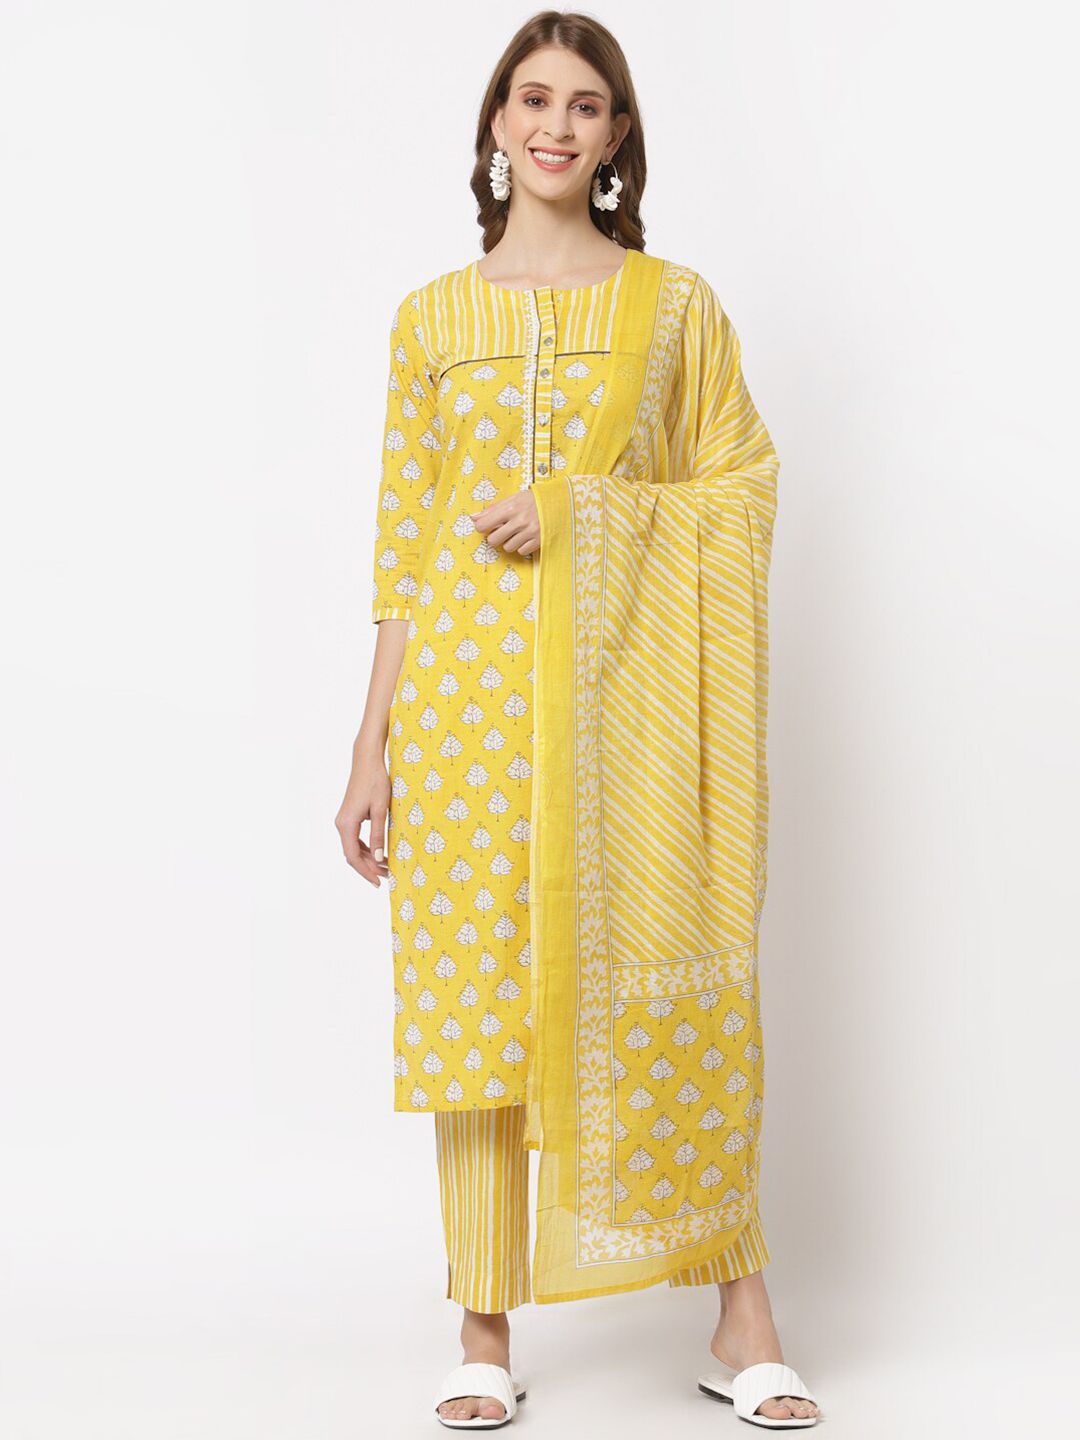 KAMI KUBI Women Yellow & White Printed Unstitched Dress Material Price in India